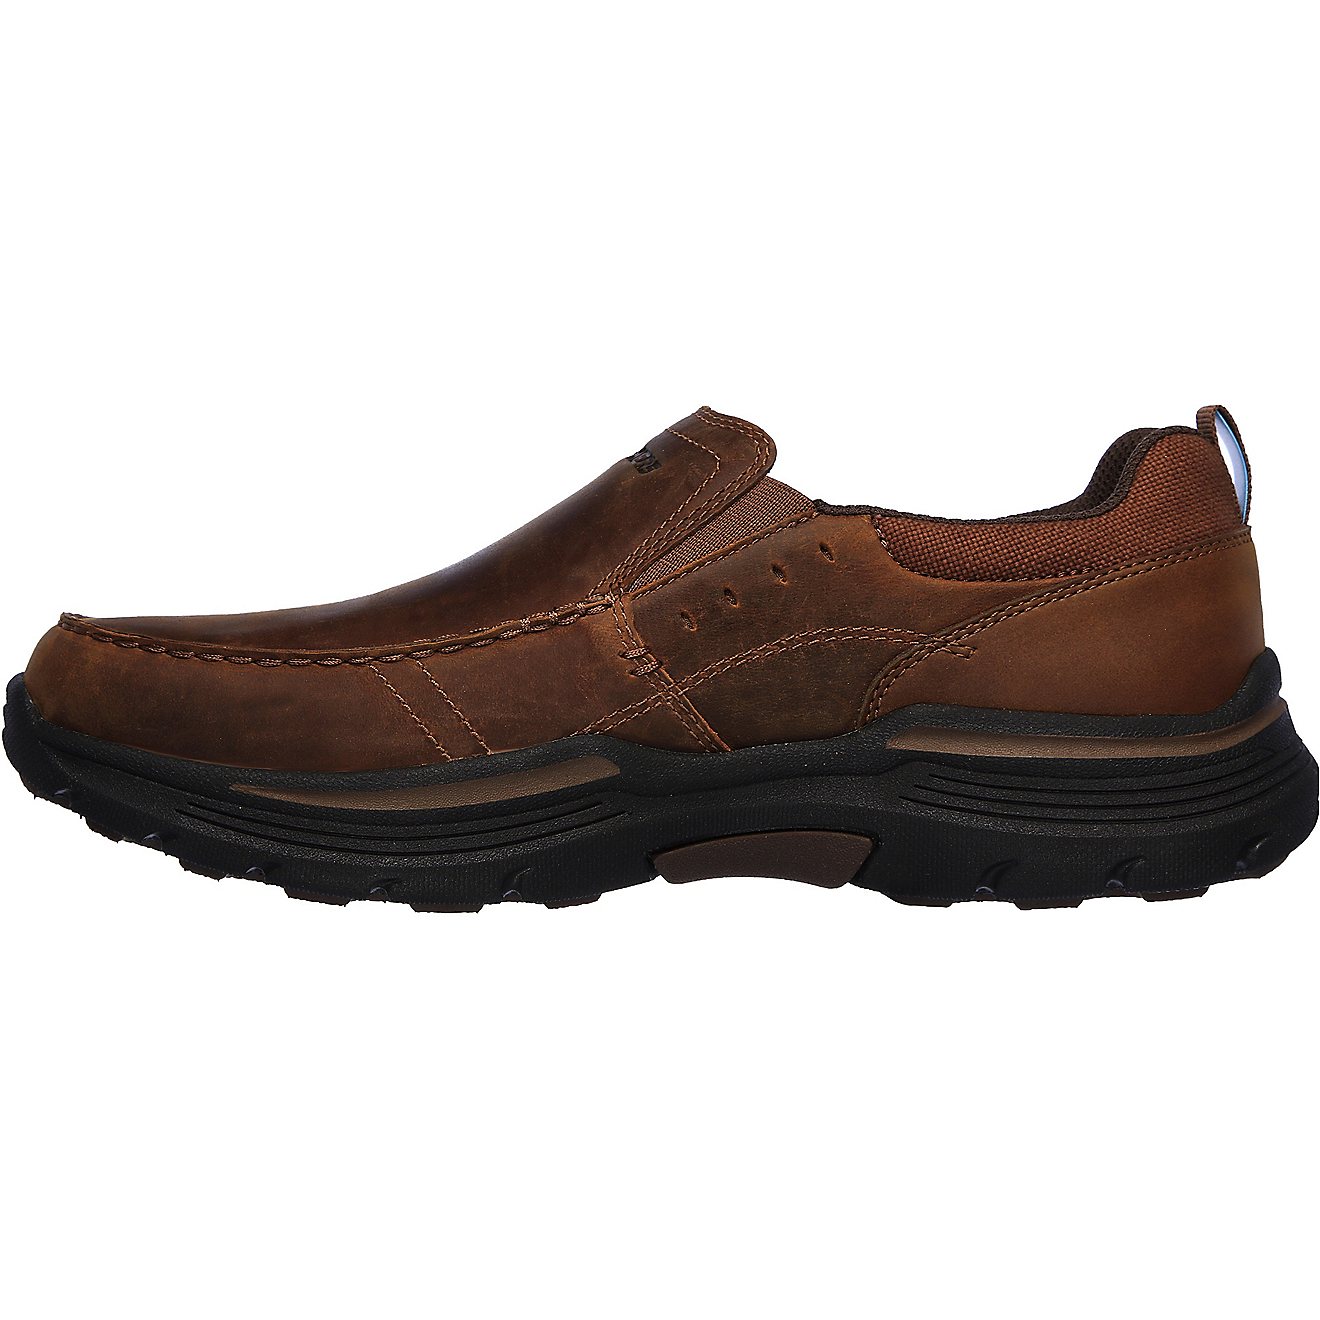 SKECHERS Men's EXPENDED SEVENO Casual Shoes                                                                                      - view number 3